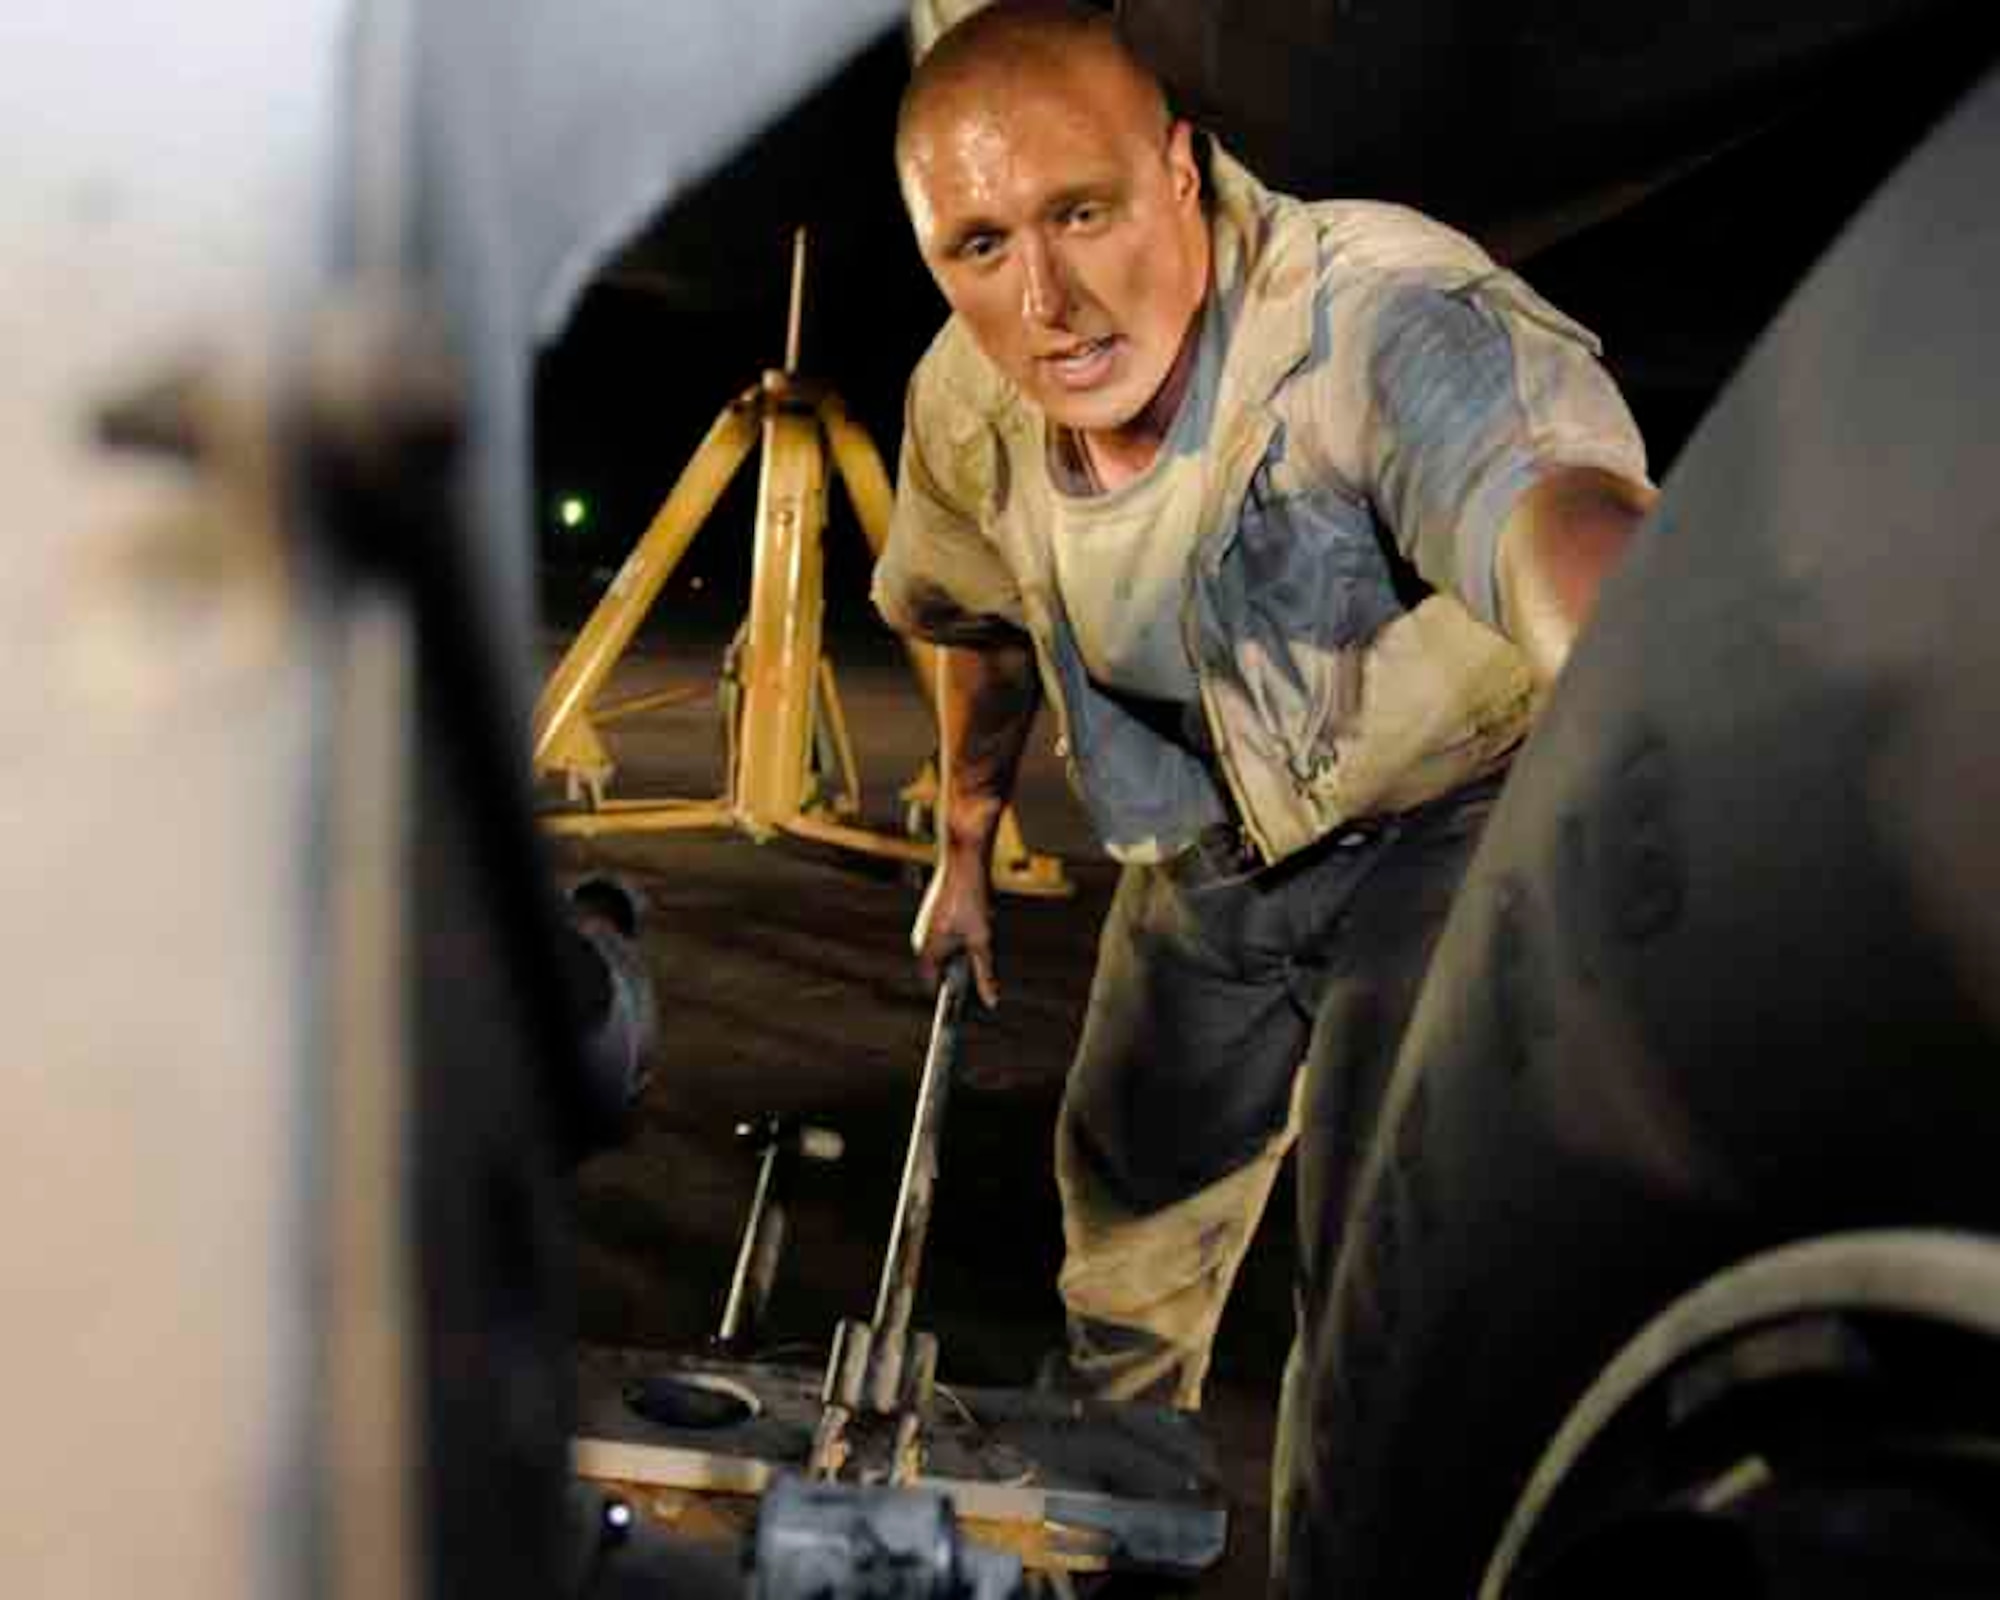 SOUTHWEST ASIA—Staff Sgt. David Nygaard, 37th Aircraft Maintenance Unit B-1 crew chief, jacks the Lancer's landing gear to change the brakes and tires May 29. Sergeant Nygaard is deployed from Ellsworth Air Force Base, S.D. “At night, you can see the afterburners of the B-1s that are taking off. After a good, long day of work, it makes you feel like you made a difference in the world ... and you’re glad you’re not the Taliban,” he said. (U.S. Air Force photo/ Senior Airman Domonique Simmons)